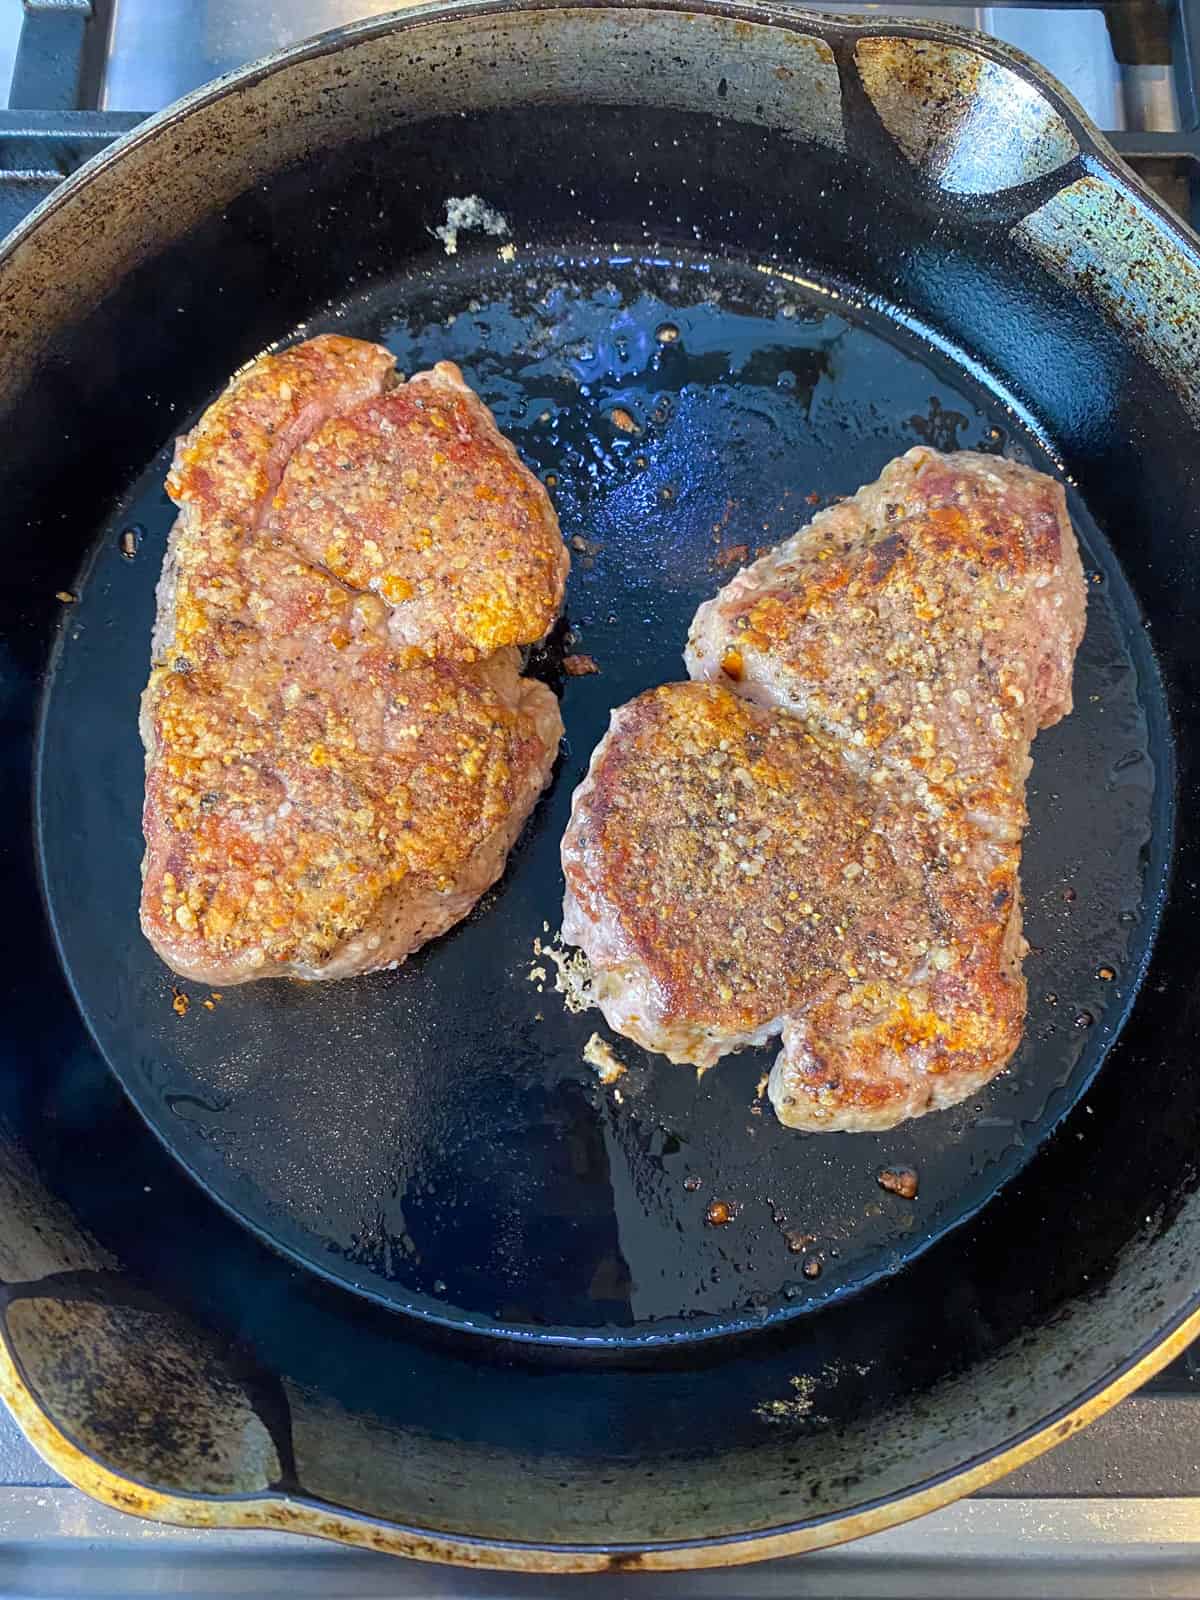 Sear the filet mignon in a hot cast iron skillet until deeply seared on both sides, but no cooked all the way through.